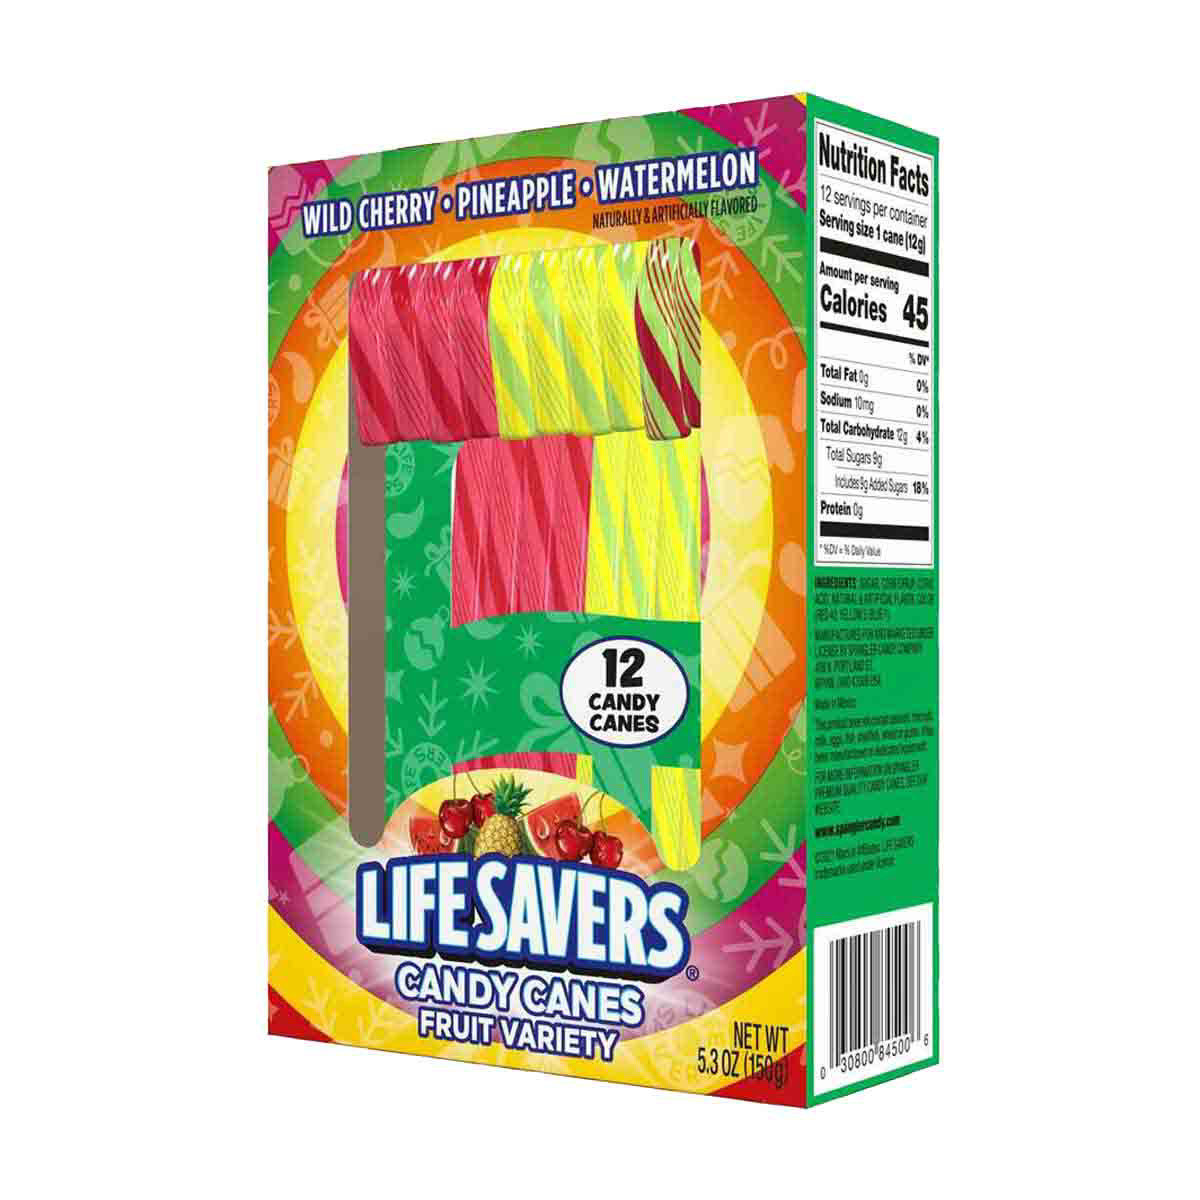 Life Savers Candy Canes, 12 Ct